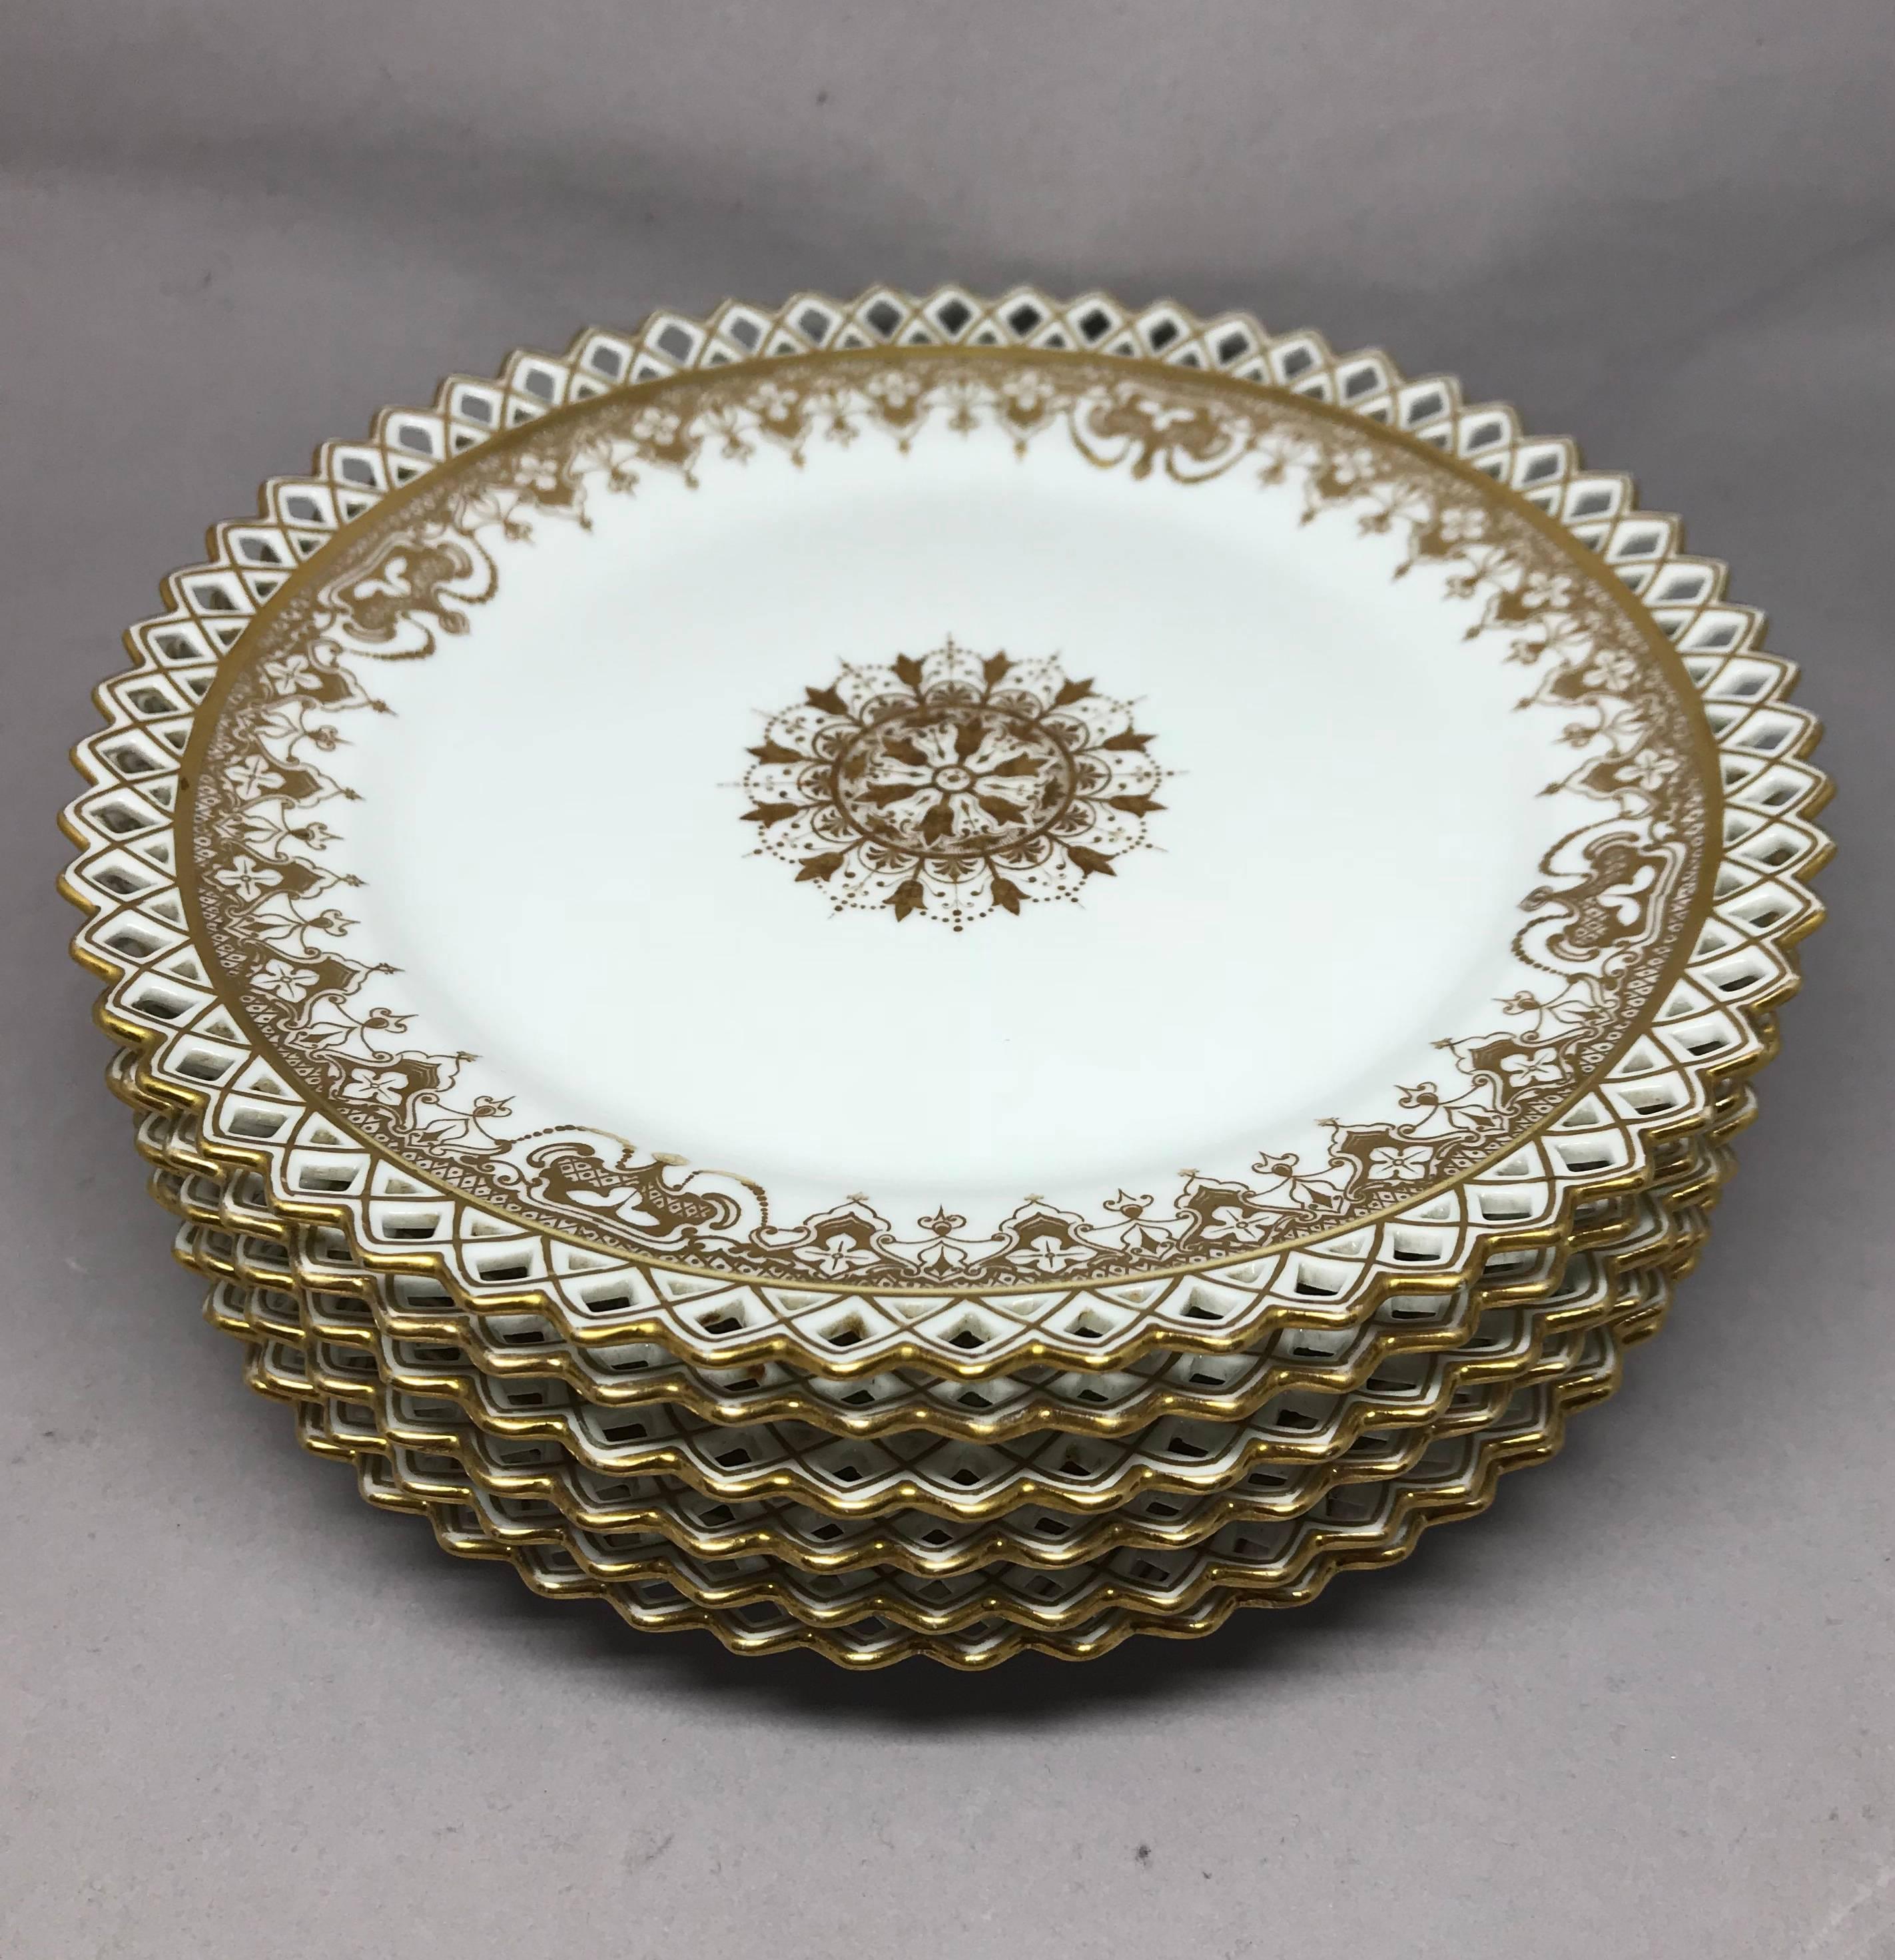 Set of six gilt snowflake plates. Six white and gold decorated plates with central medallion bordered with gold swaging and further arabesque gilt reticulation. Germany, late 19th century
Dimensions: 8.75